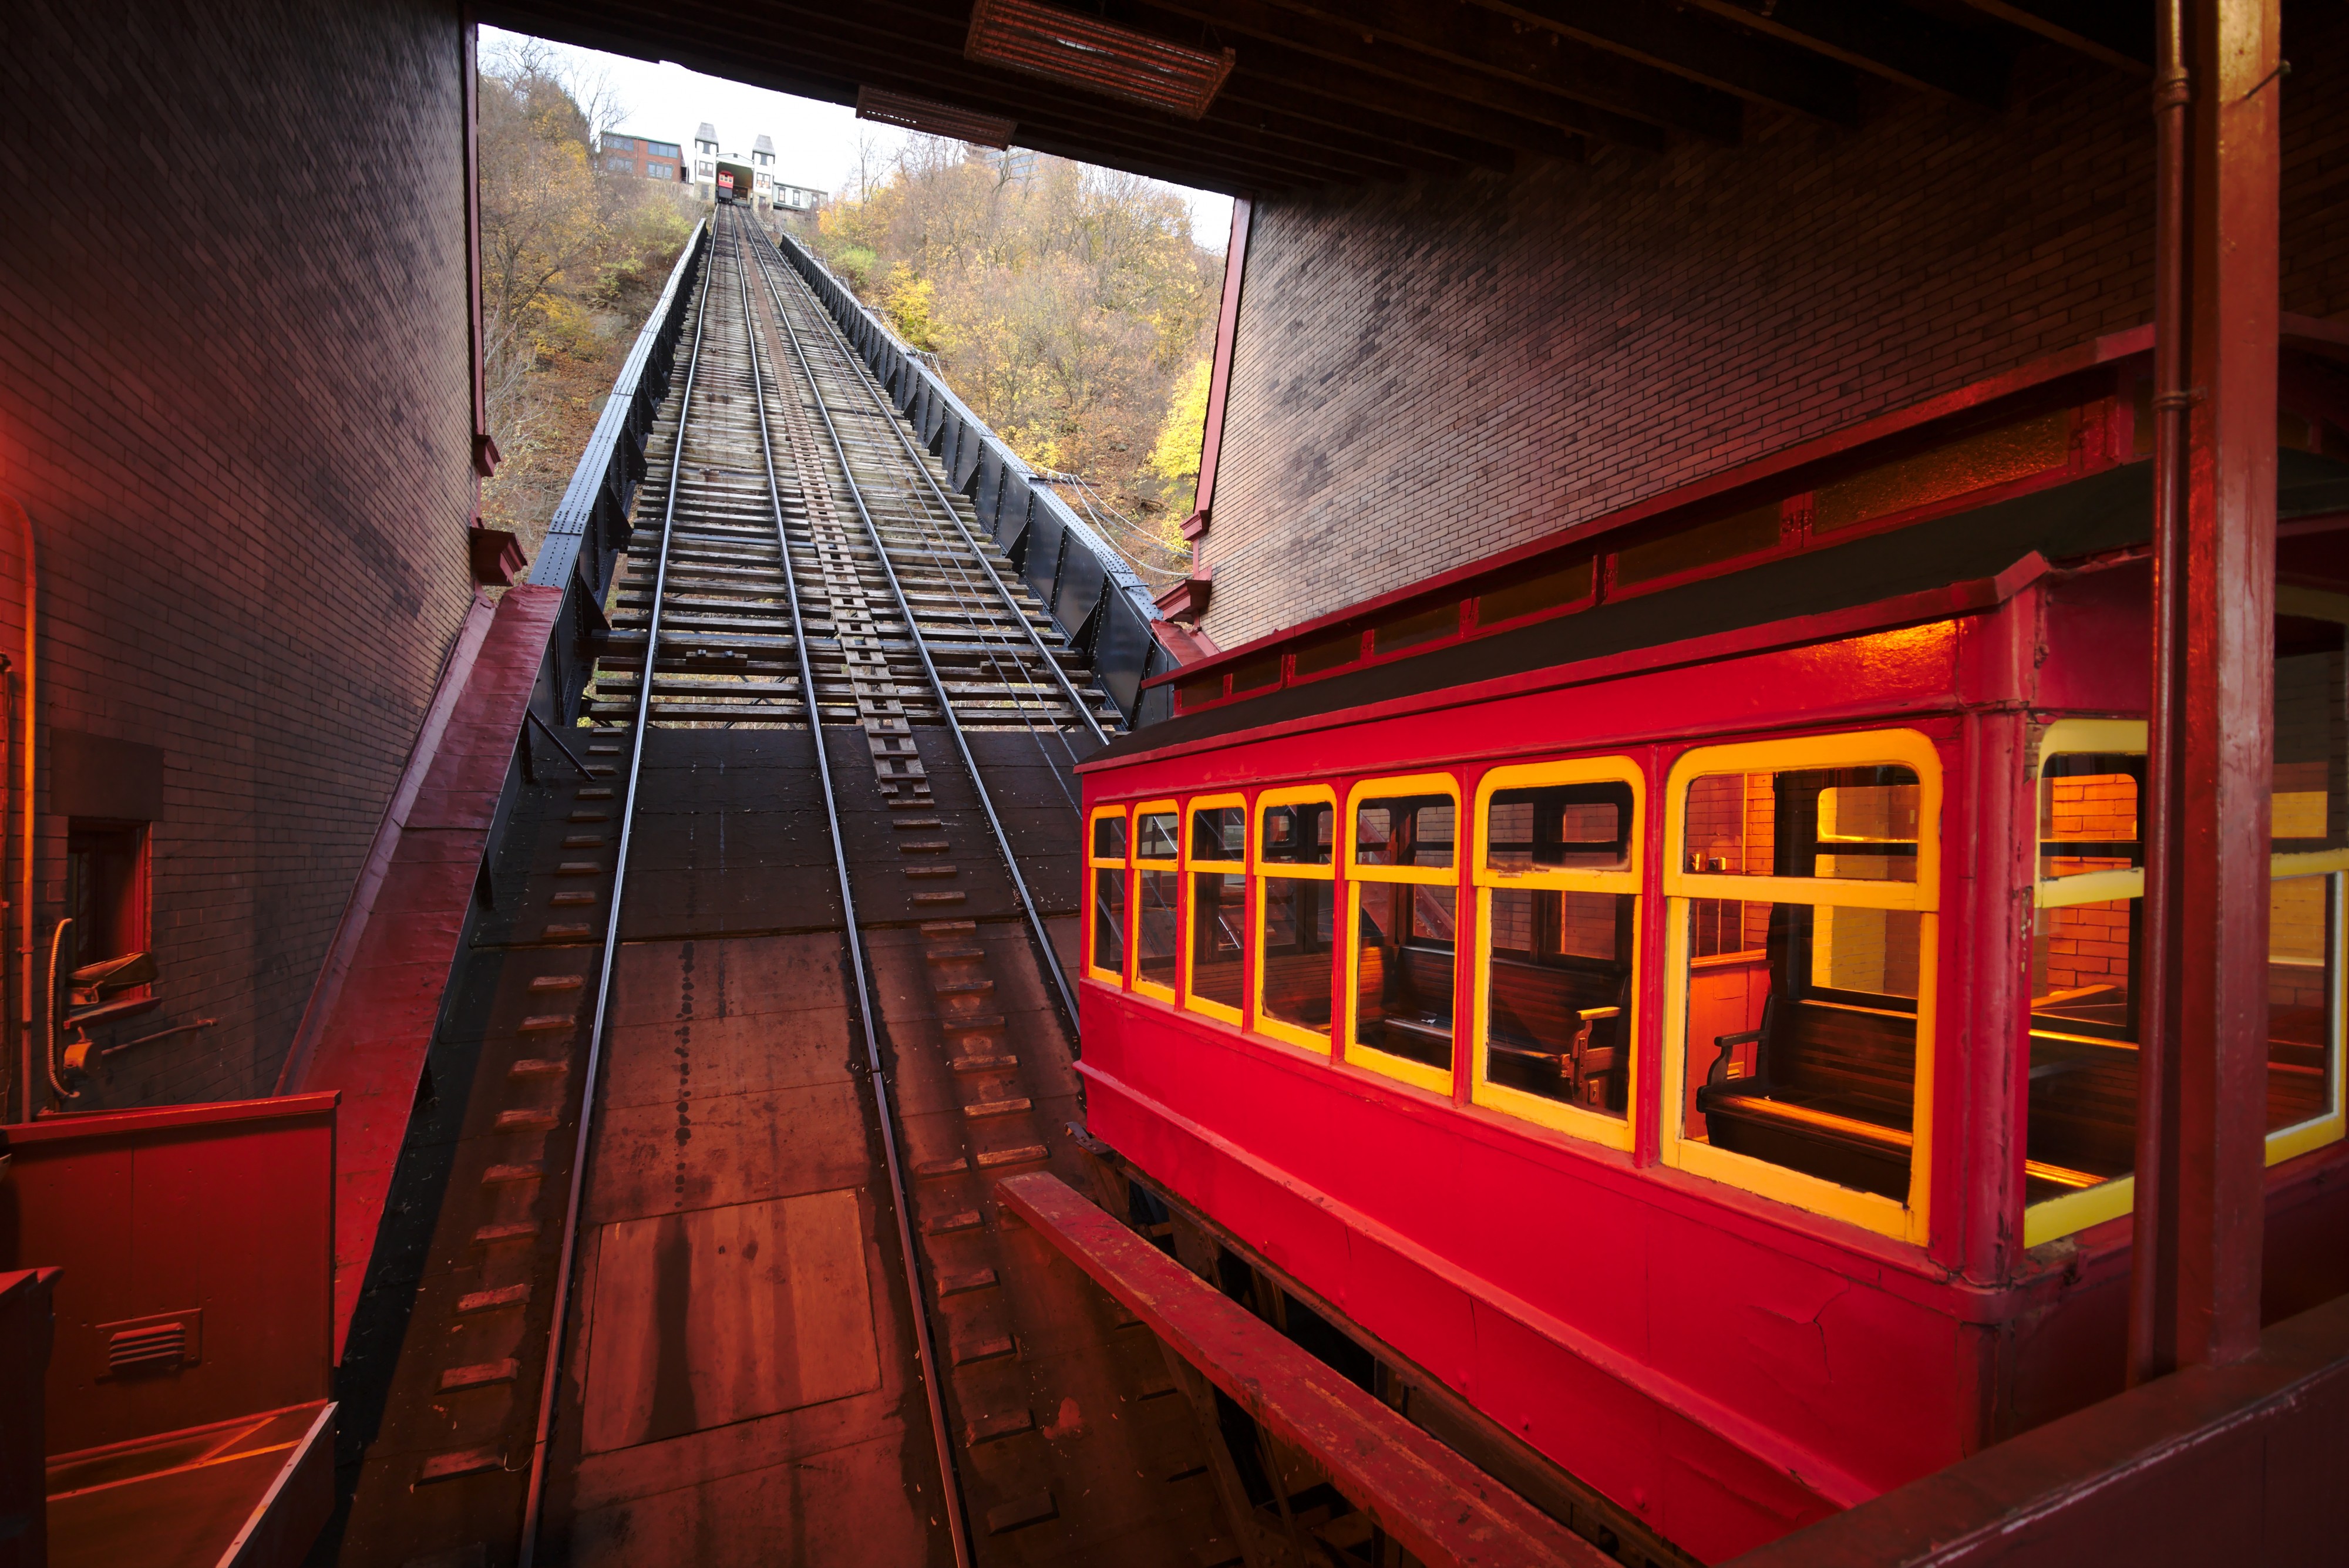 Duquesne Incline lower station with incline car